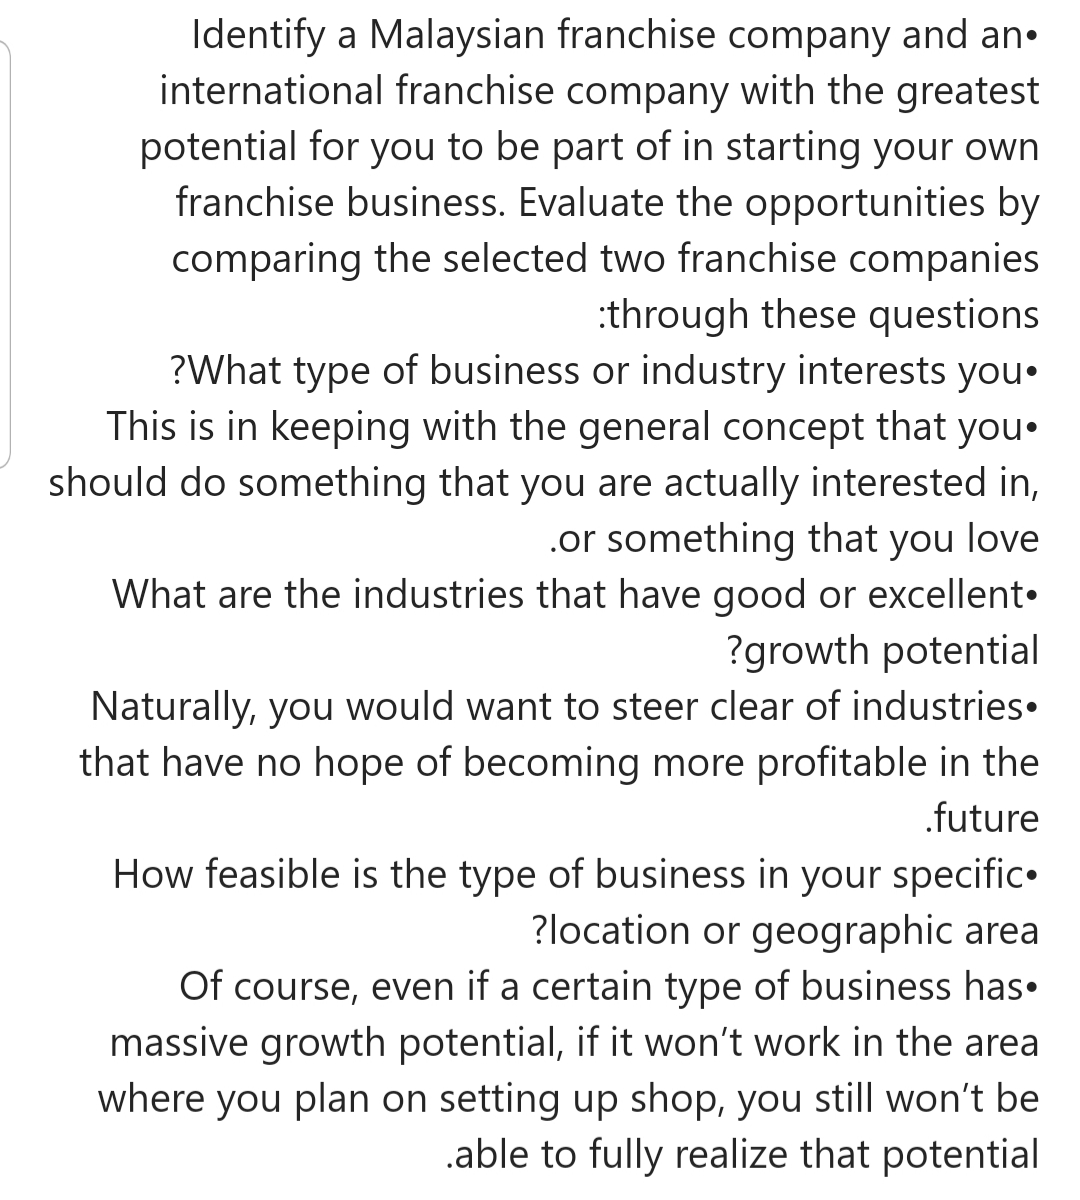 Identify a Malaysian franchise company and an•
international franchise company with the greatest
potential for you to be part of in starting your own
franchise business. Evaluate the opportunities by
comparing the selected two franchise companies
:through these questions
?What type of business or industry interests you•
This is in keeping with the general concept that you.
should do something that you are actually interested in,
.or something that you love
What are the industries that have good or excellent•
?growth potential
Naturally, you would want to steer clear of industries•
that have no hope of becoming more profitable in the
.future
How feasible is the type of business in your specific•
?location or geographic area
Of course, even if a certain type of business has.
massive growth potential, if it won't work in the area
where you plan on setting up shop, you still won't be
.able to fully realize that potential
